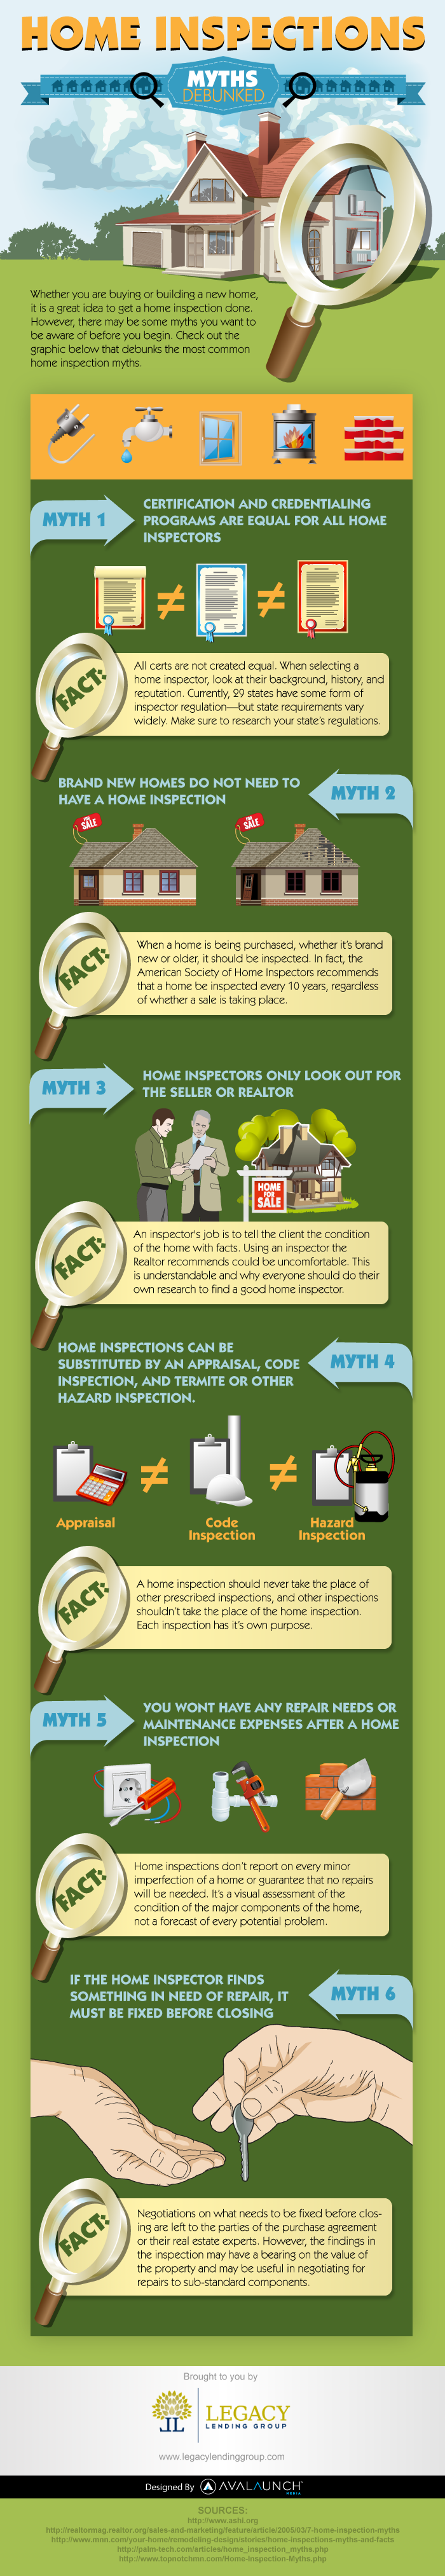 Facts and Myths About Home Inspection